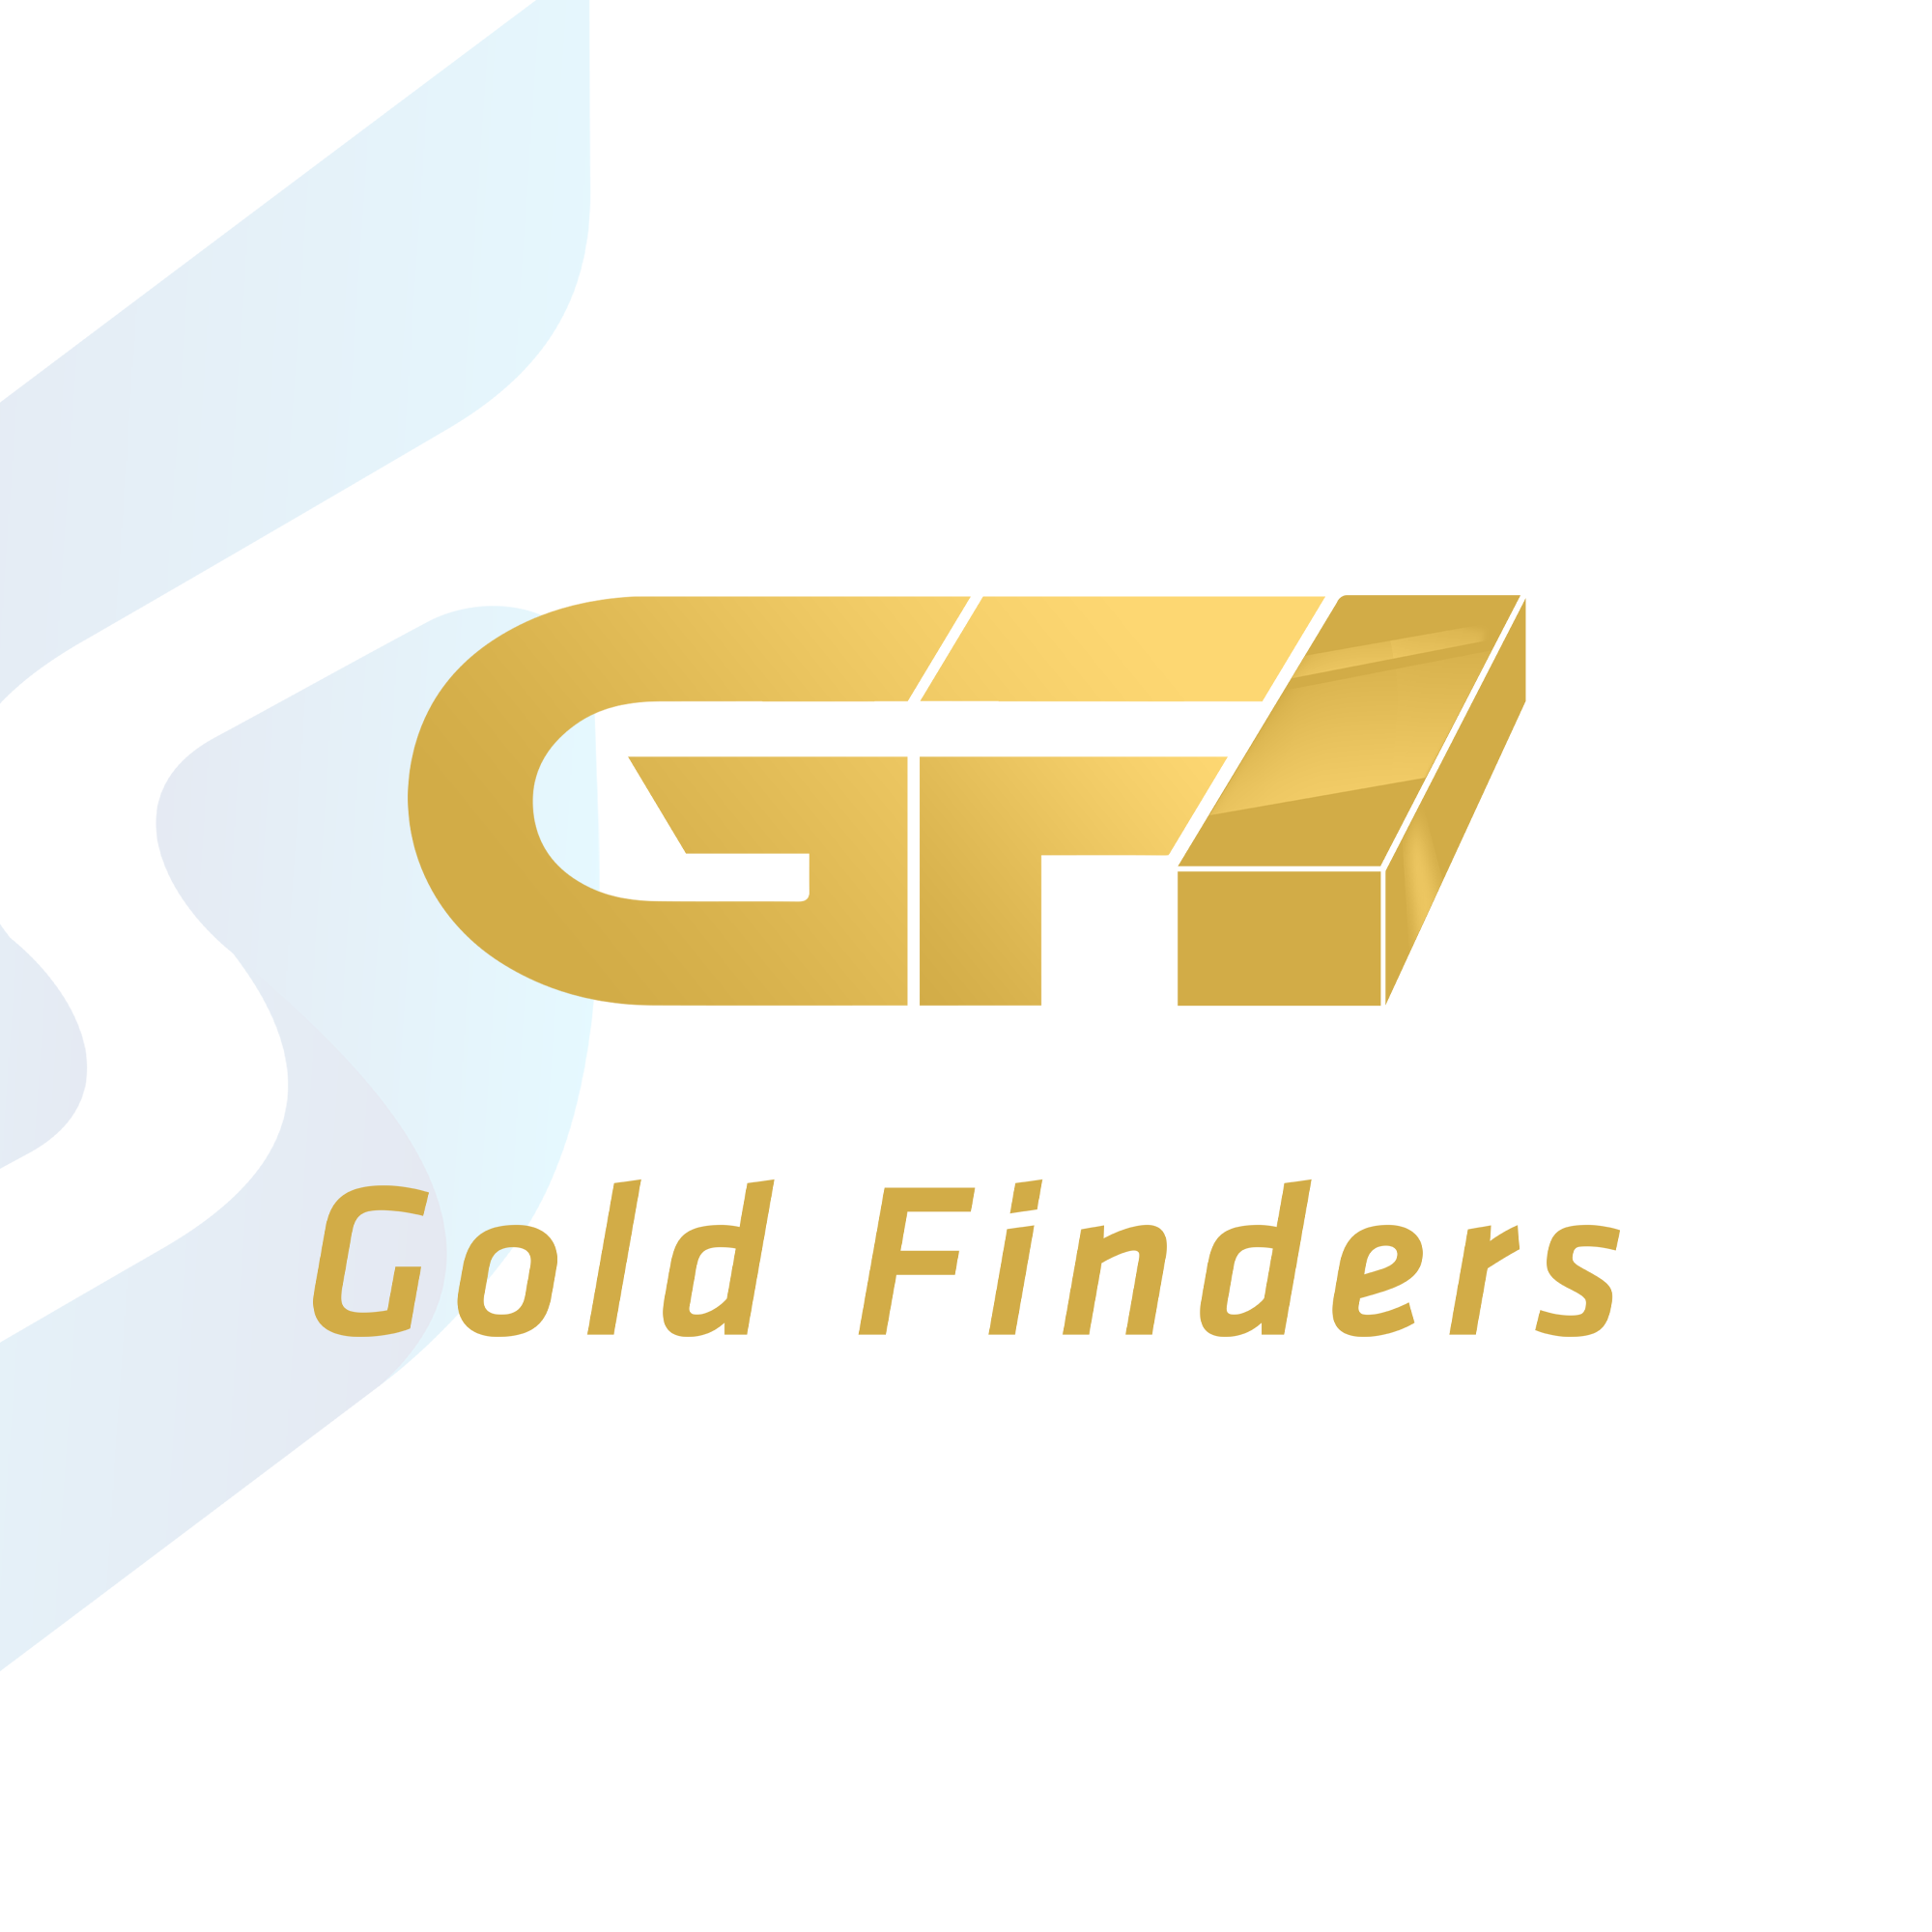 Gold finders